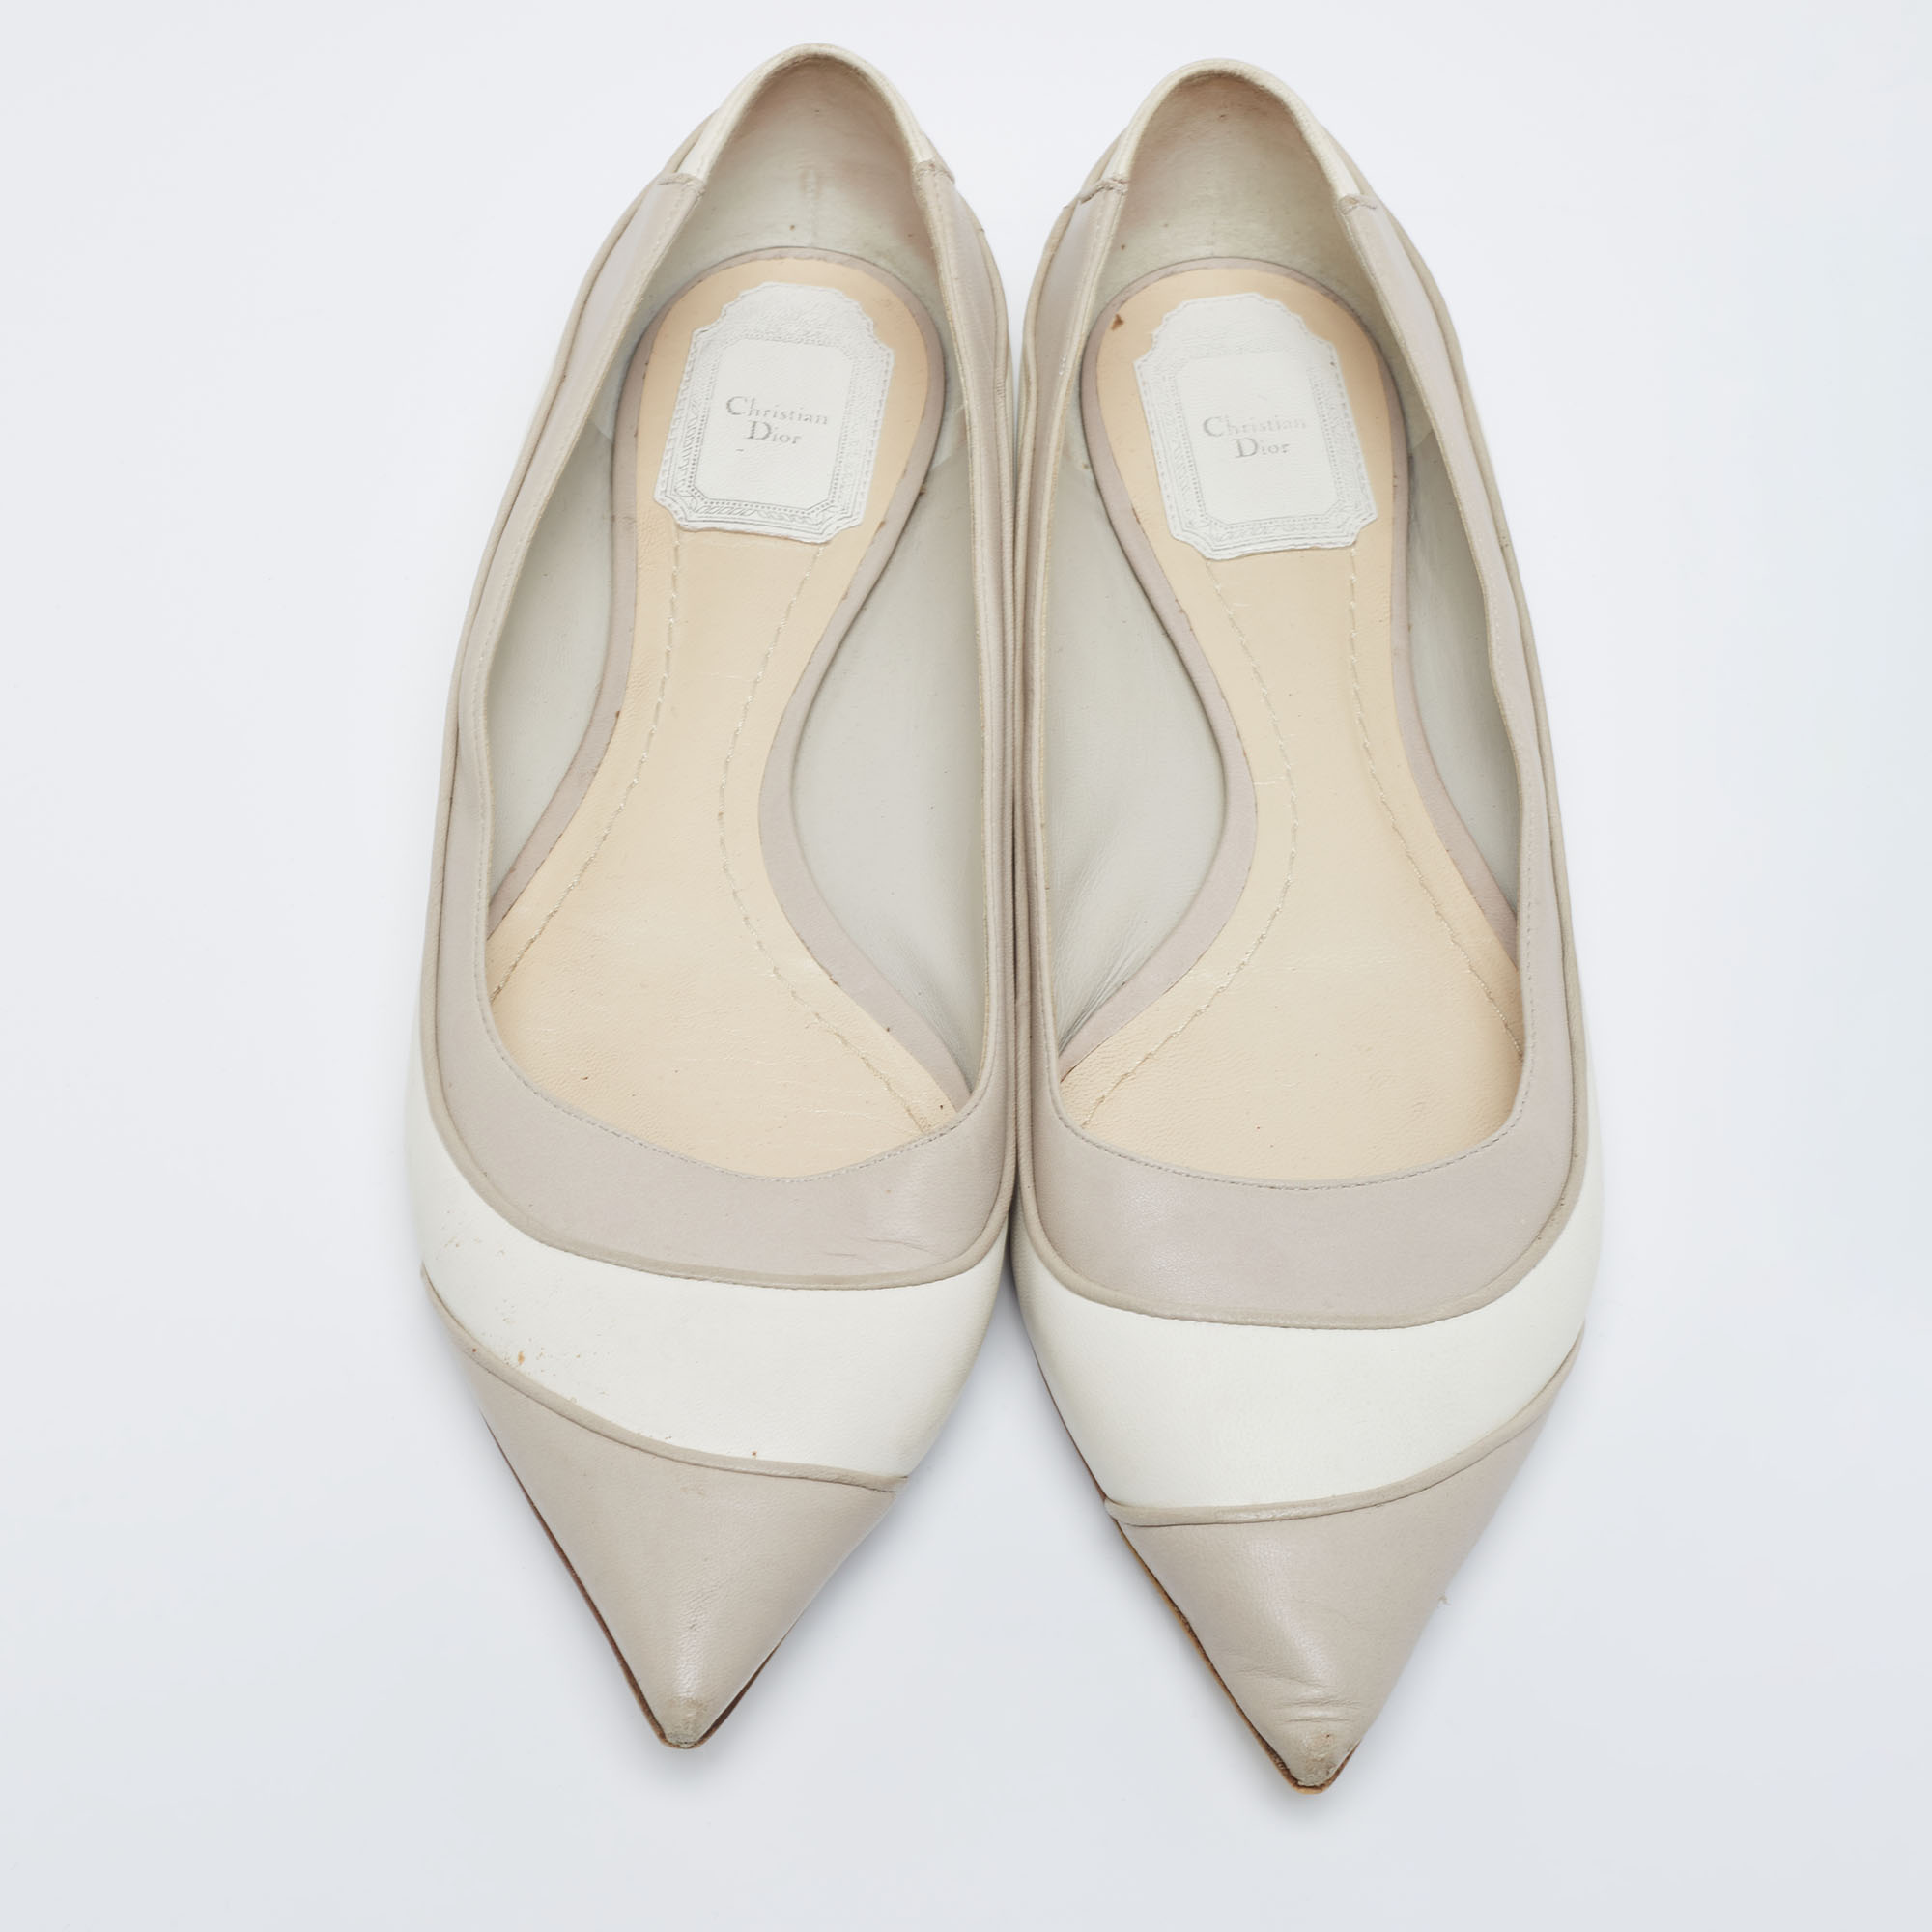 Dior Off-White/Light Grey Leather Pointed Toe Ballet Flats Size 40.5